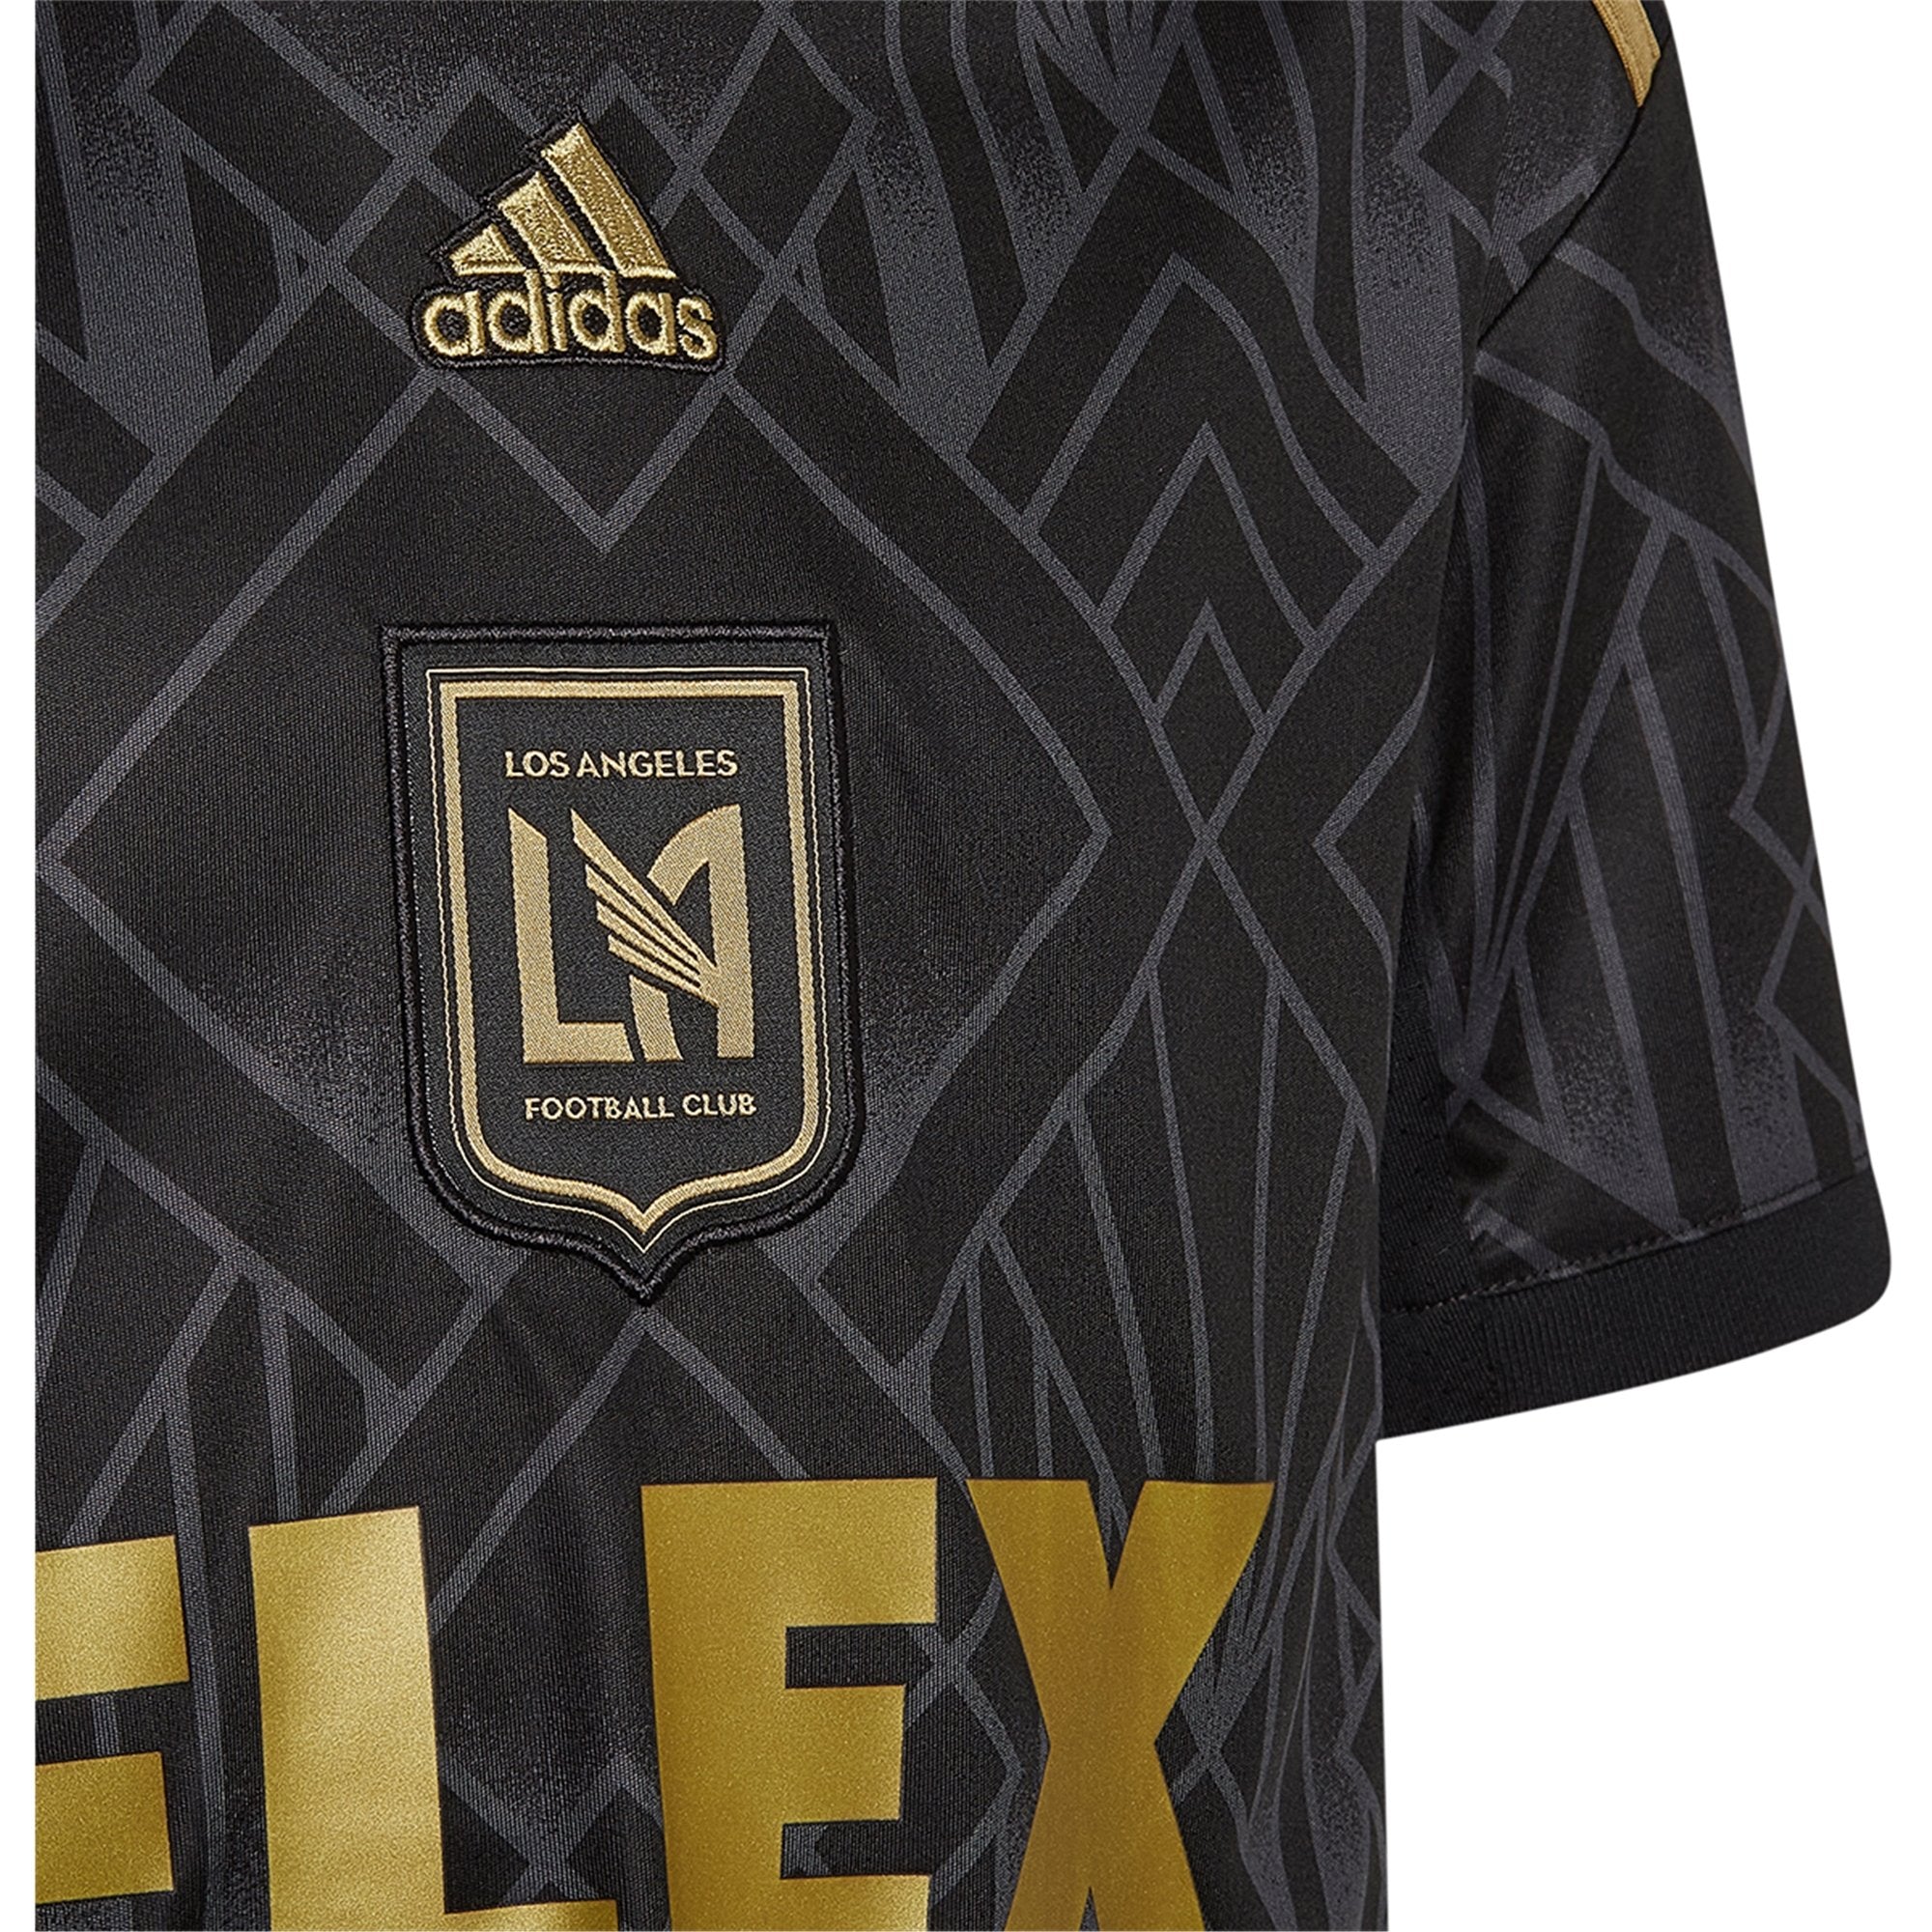 Adidas LAFC 22/23 Authentic Home Jersey for Sale in Los Angeles